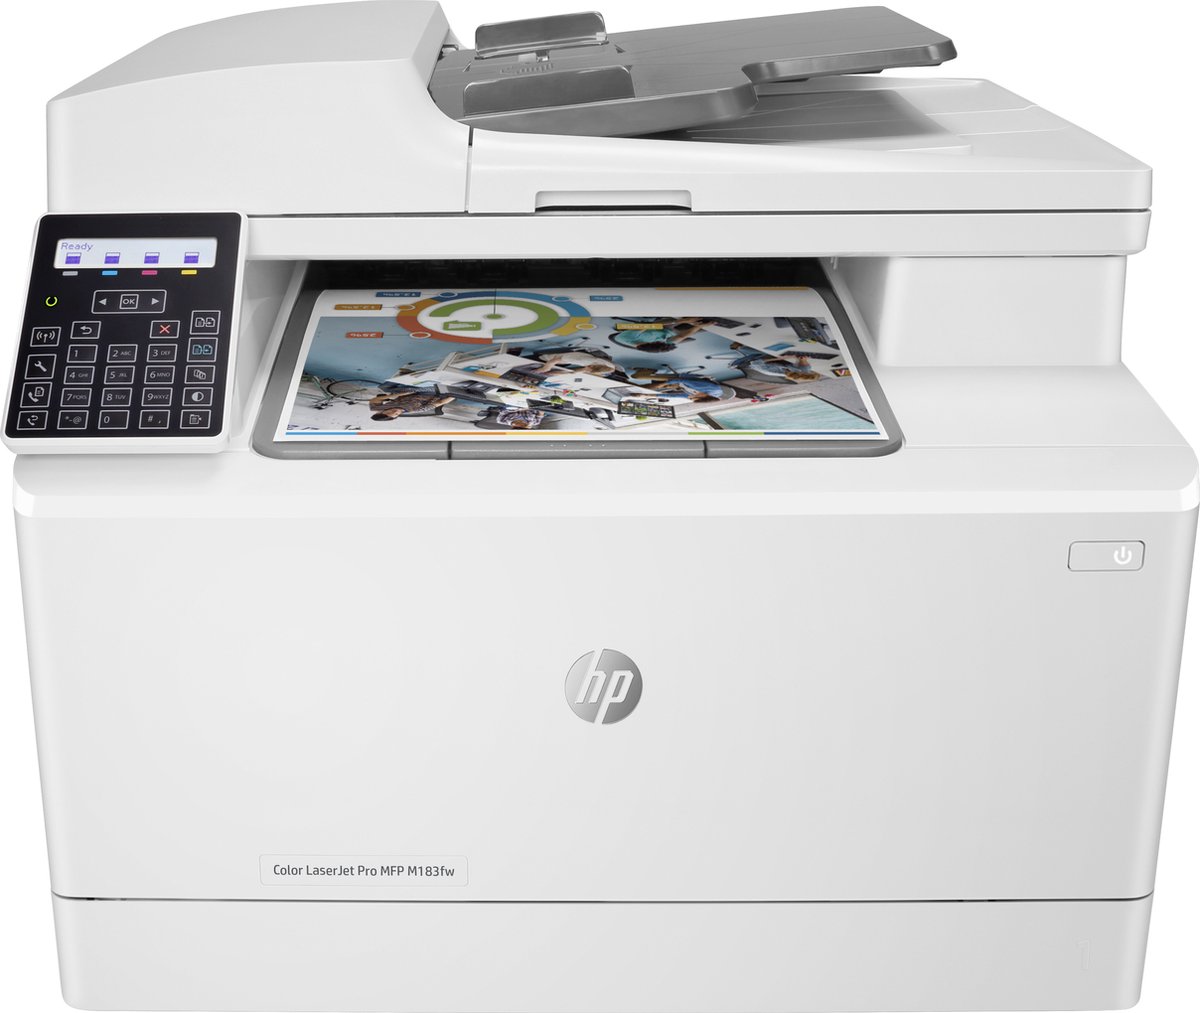 HP Color Laserjet Pro MFP M183fw - All-in-One printer - HP